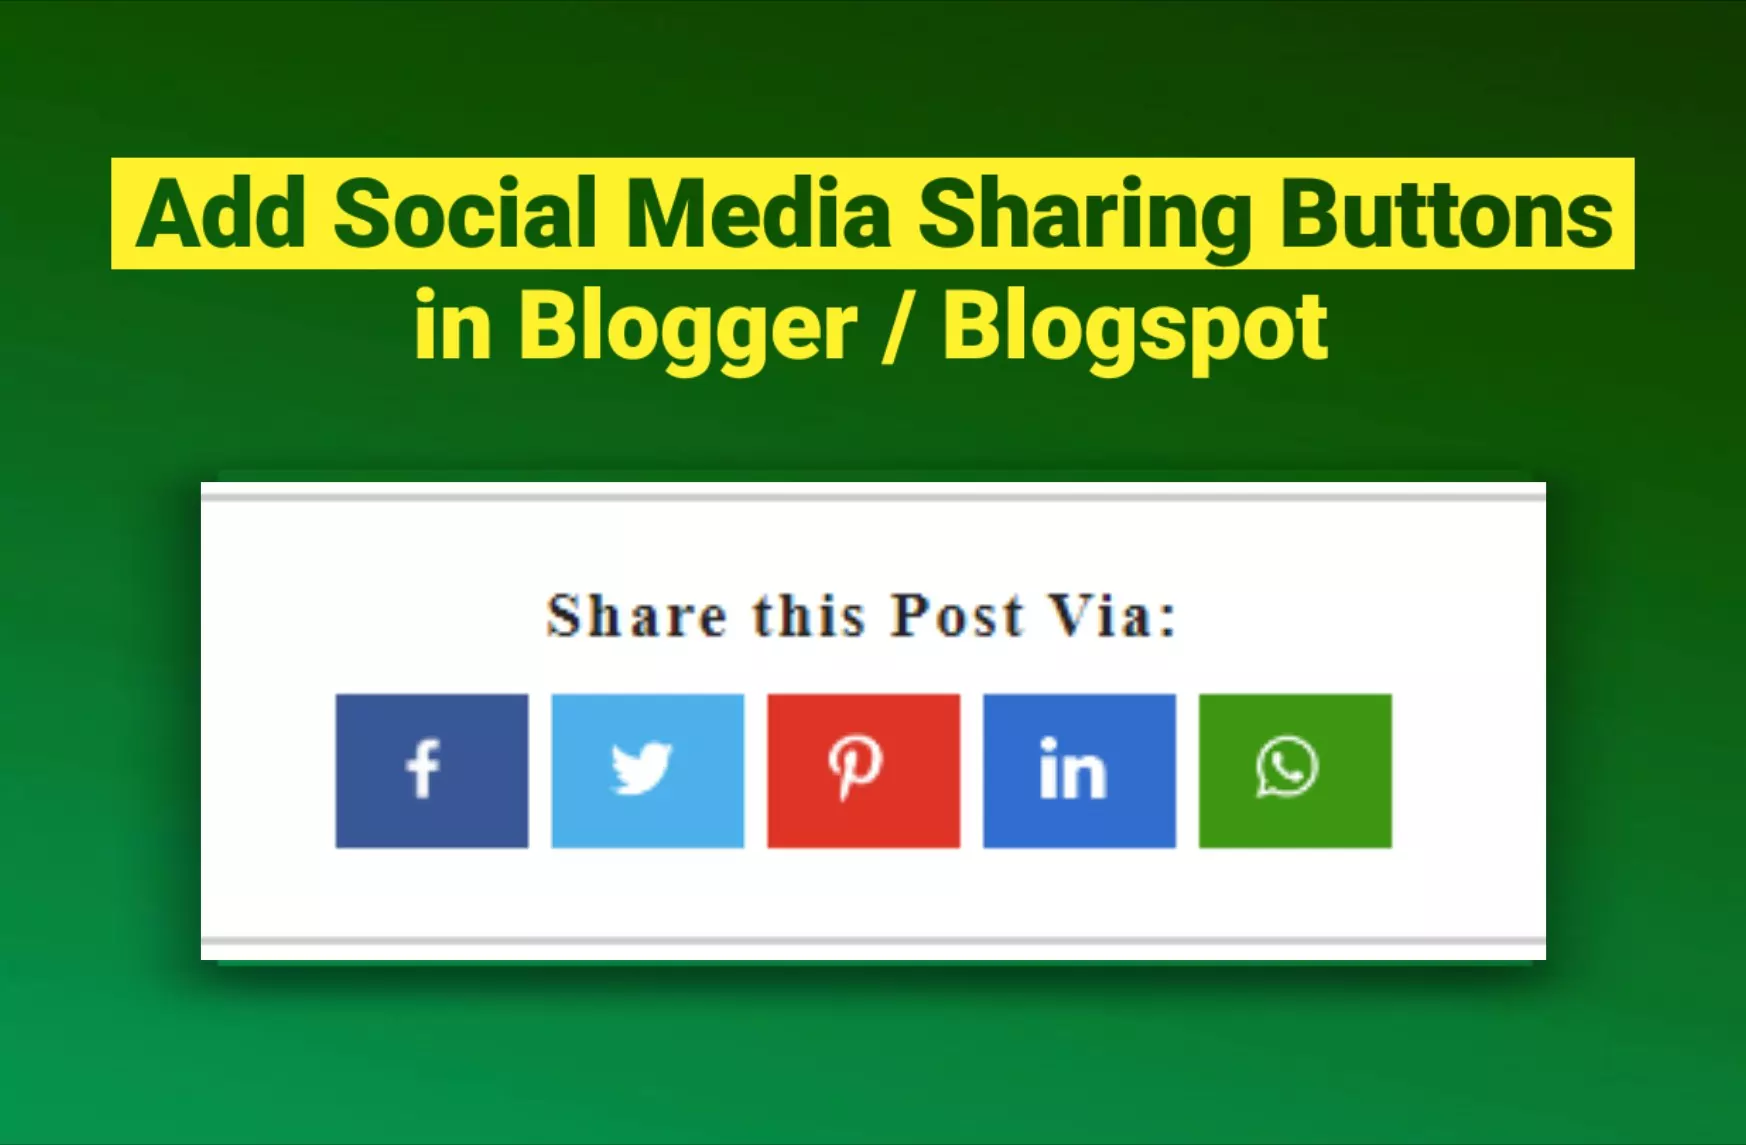 How to Add Social Media Sharing Buttons in Blogger and Blogspot